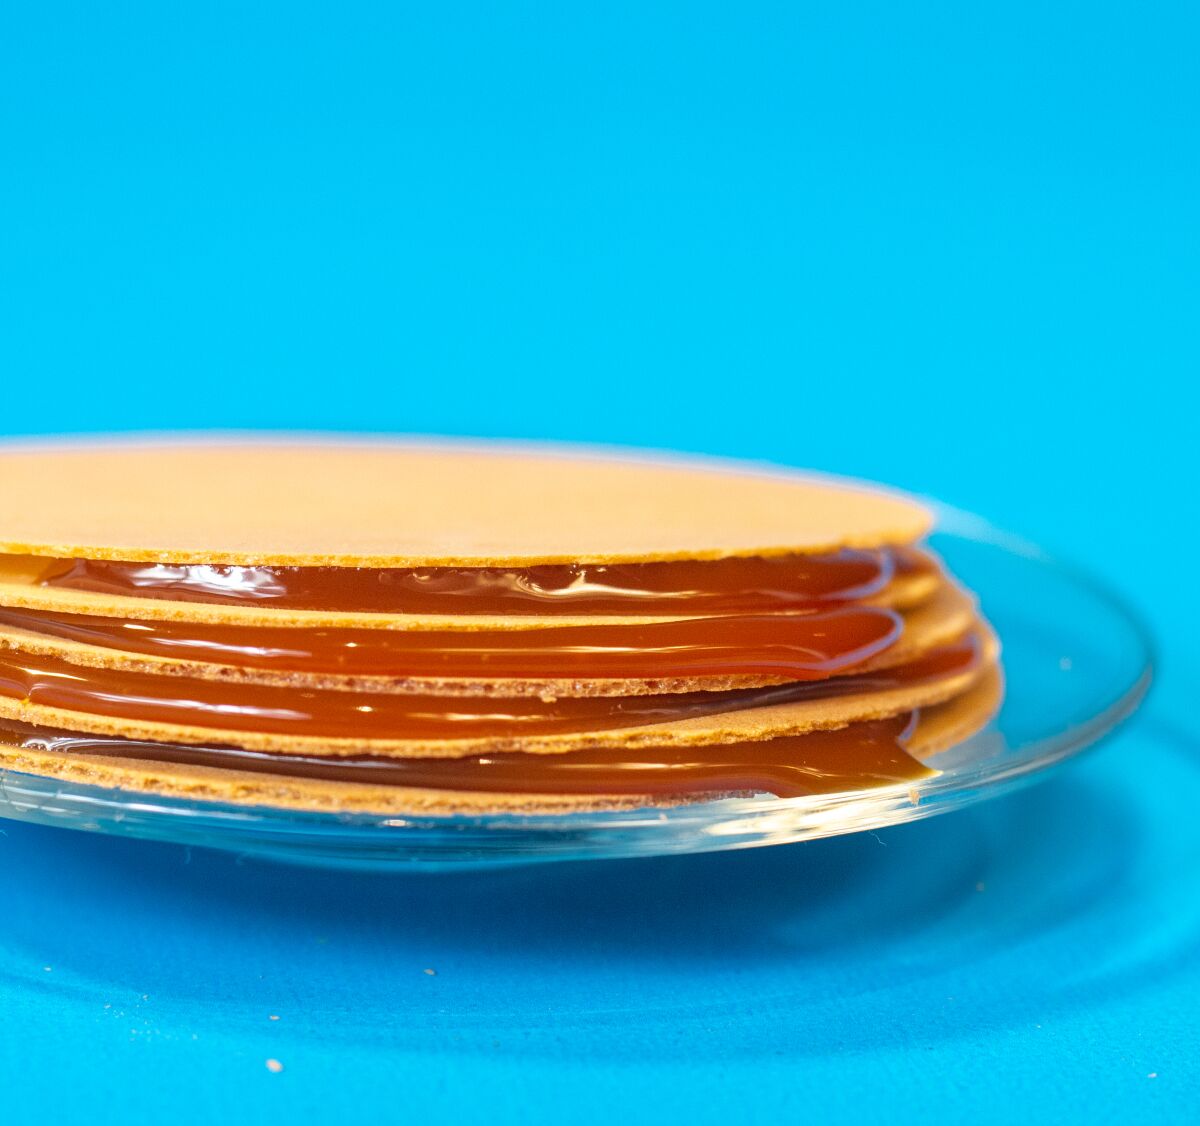 Obleas con cajeta, crispy wafers with goat’s milk caramel, is a traditional Mexican treat.